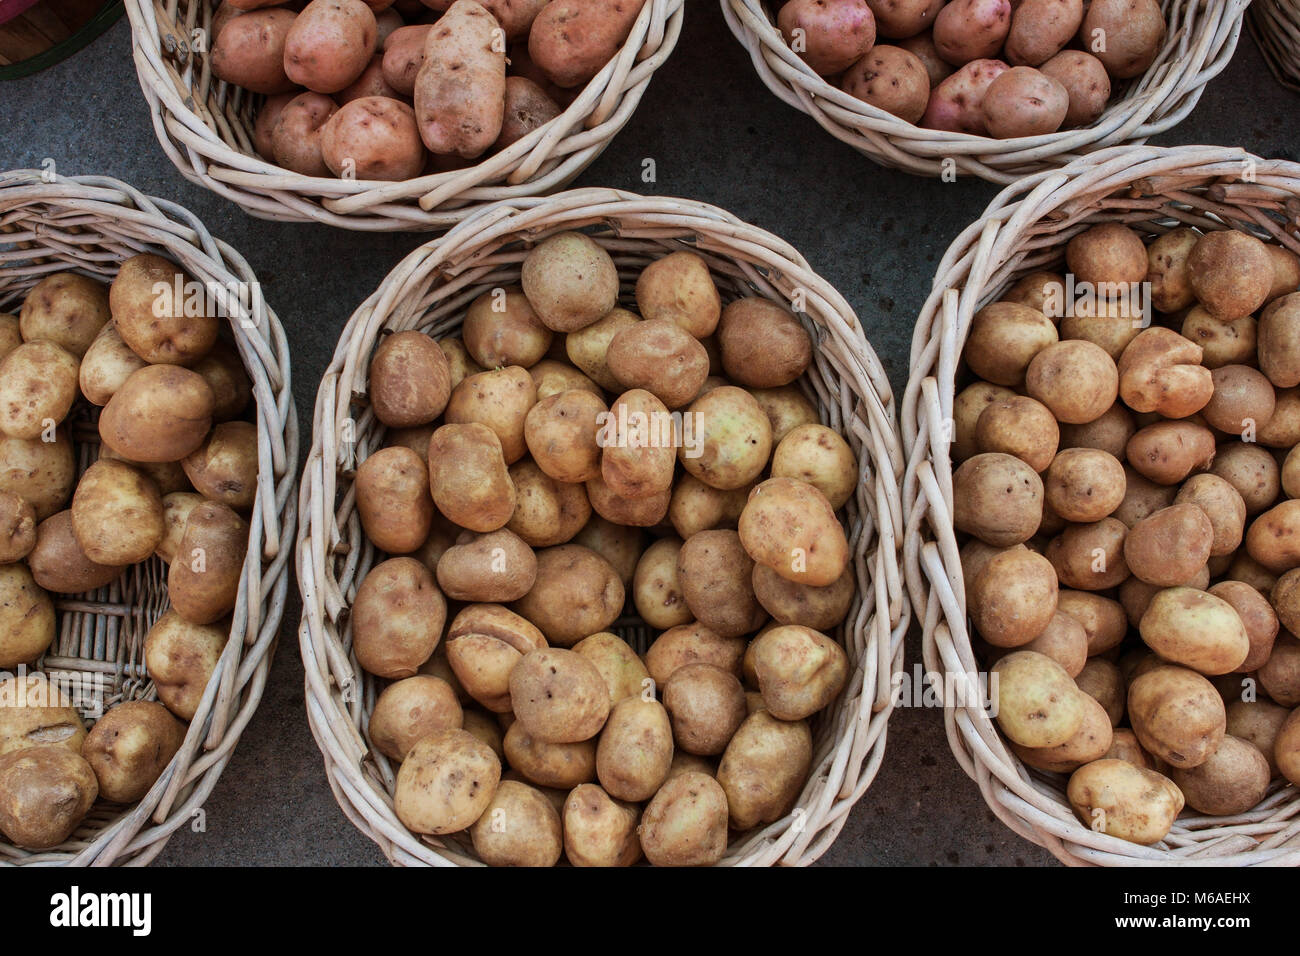 Potatoes sit in multiple wicker baskets at a local farmers market Stock Photo